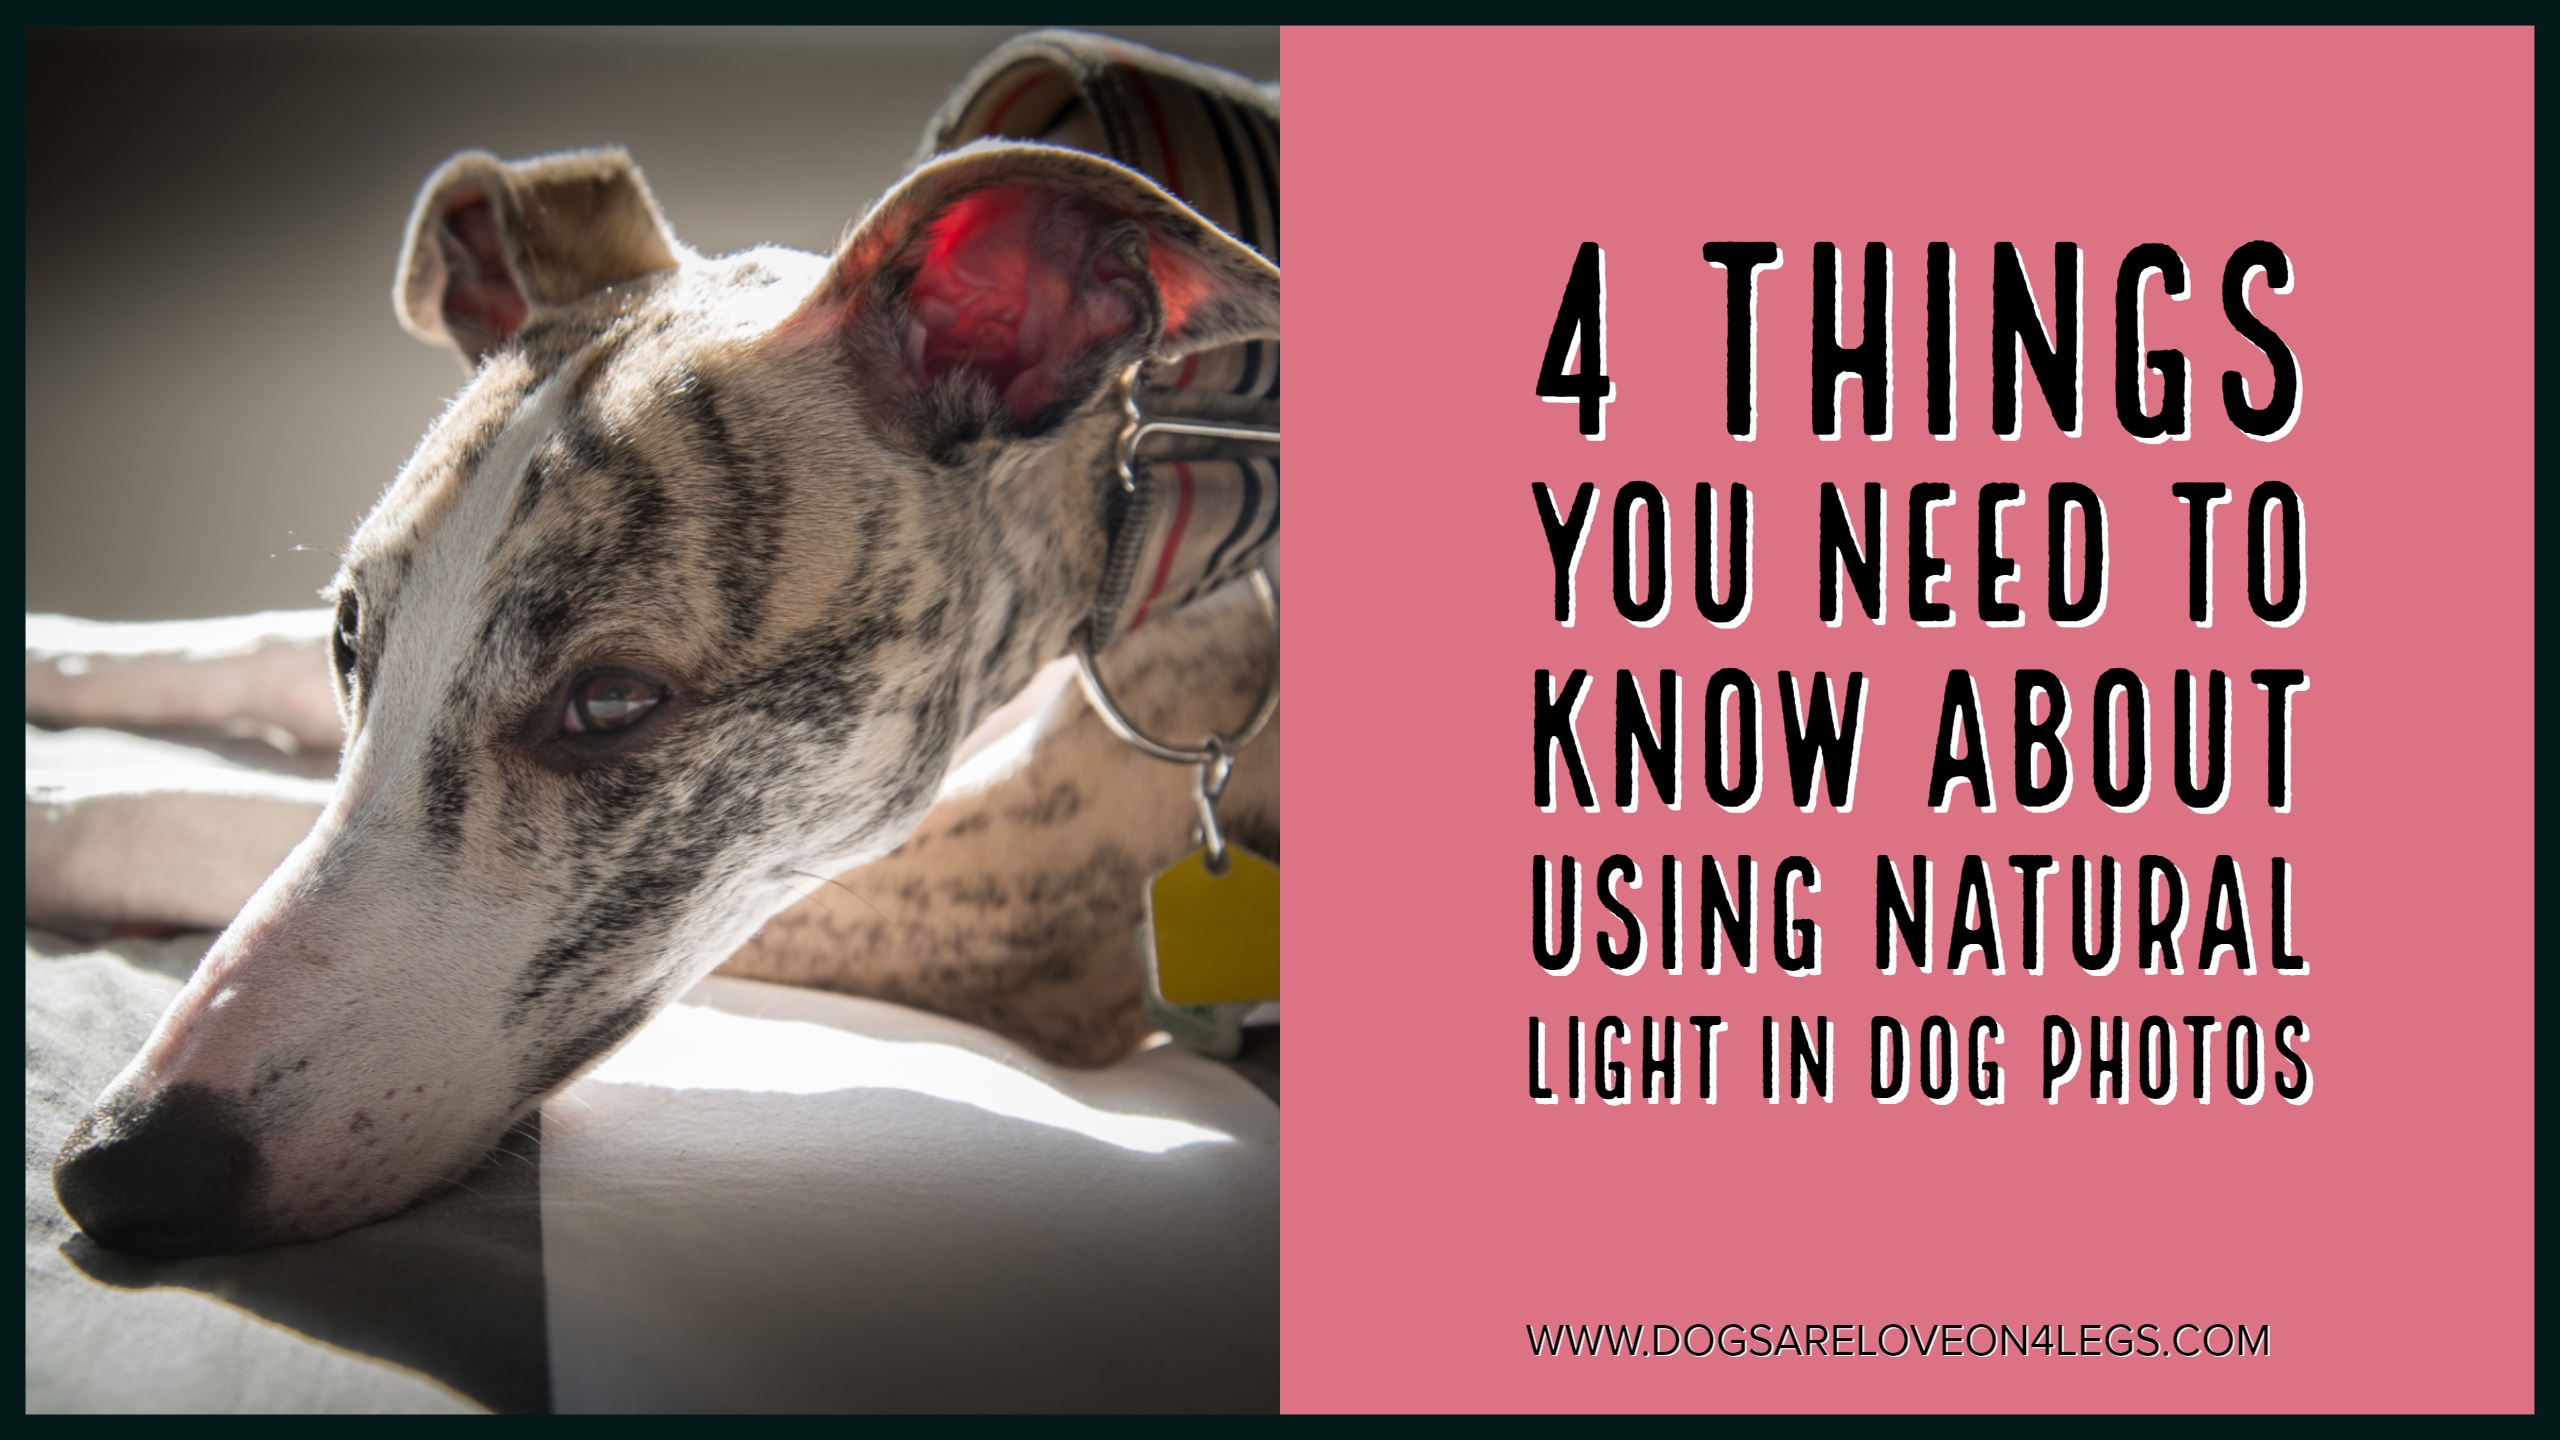 4 Things You Need To Know About Using Indoor Natural Light In Dog Photos